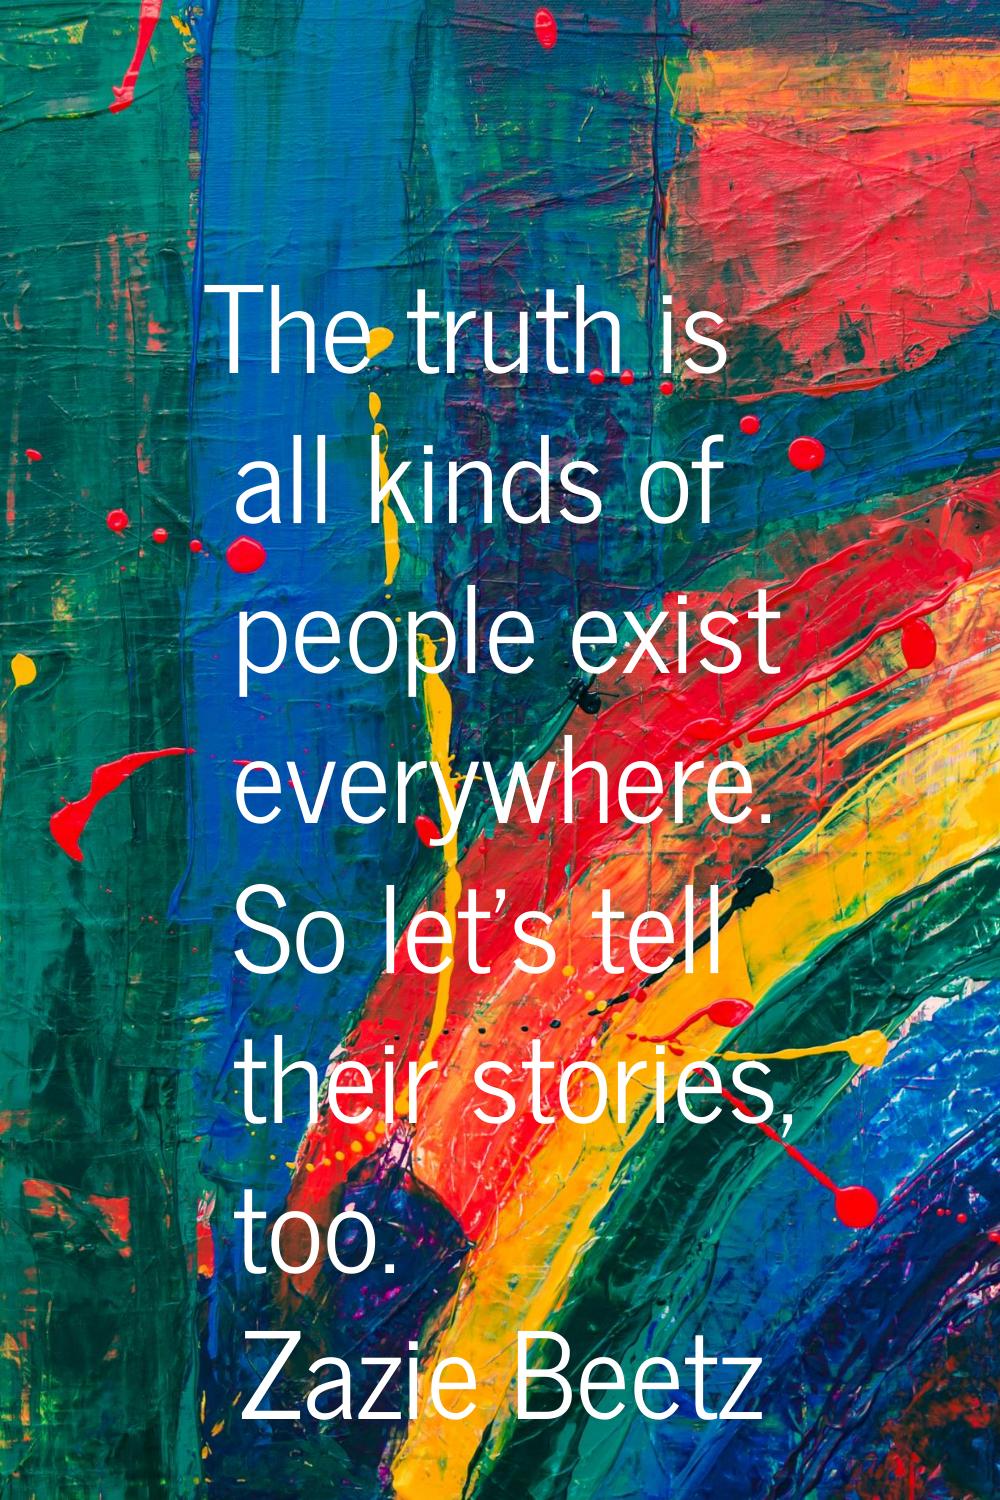 The truth is all kinds of people exist everywhere. So let's tell their stories, too.